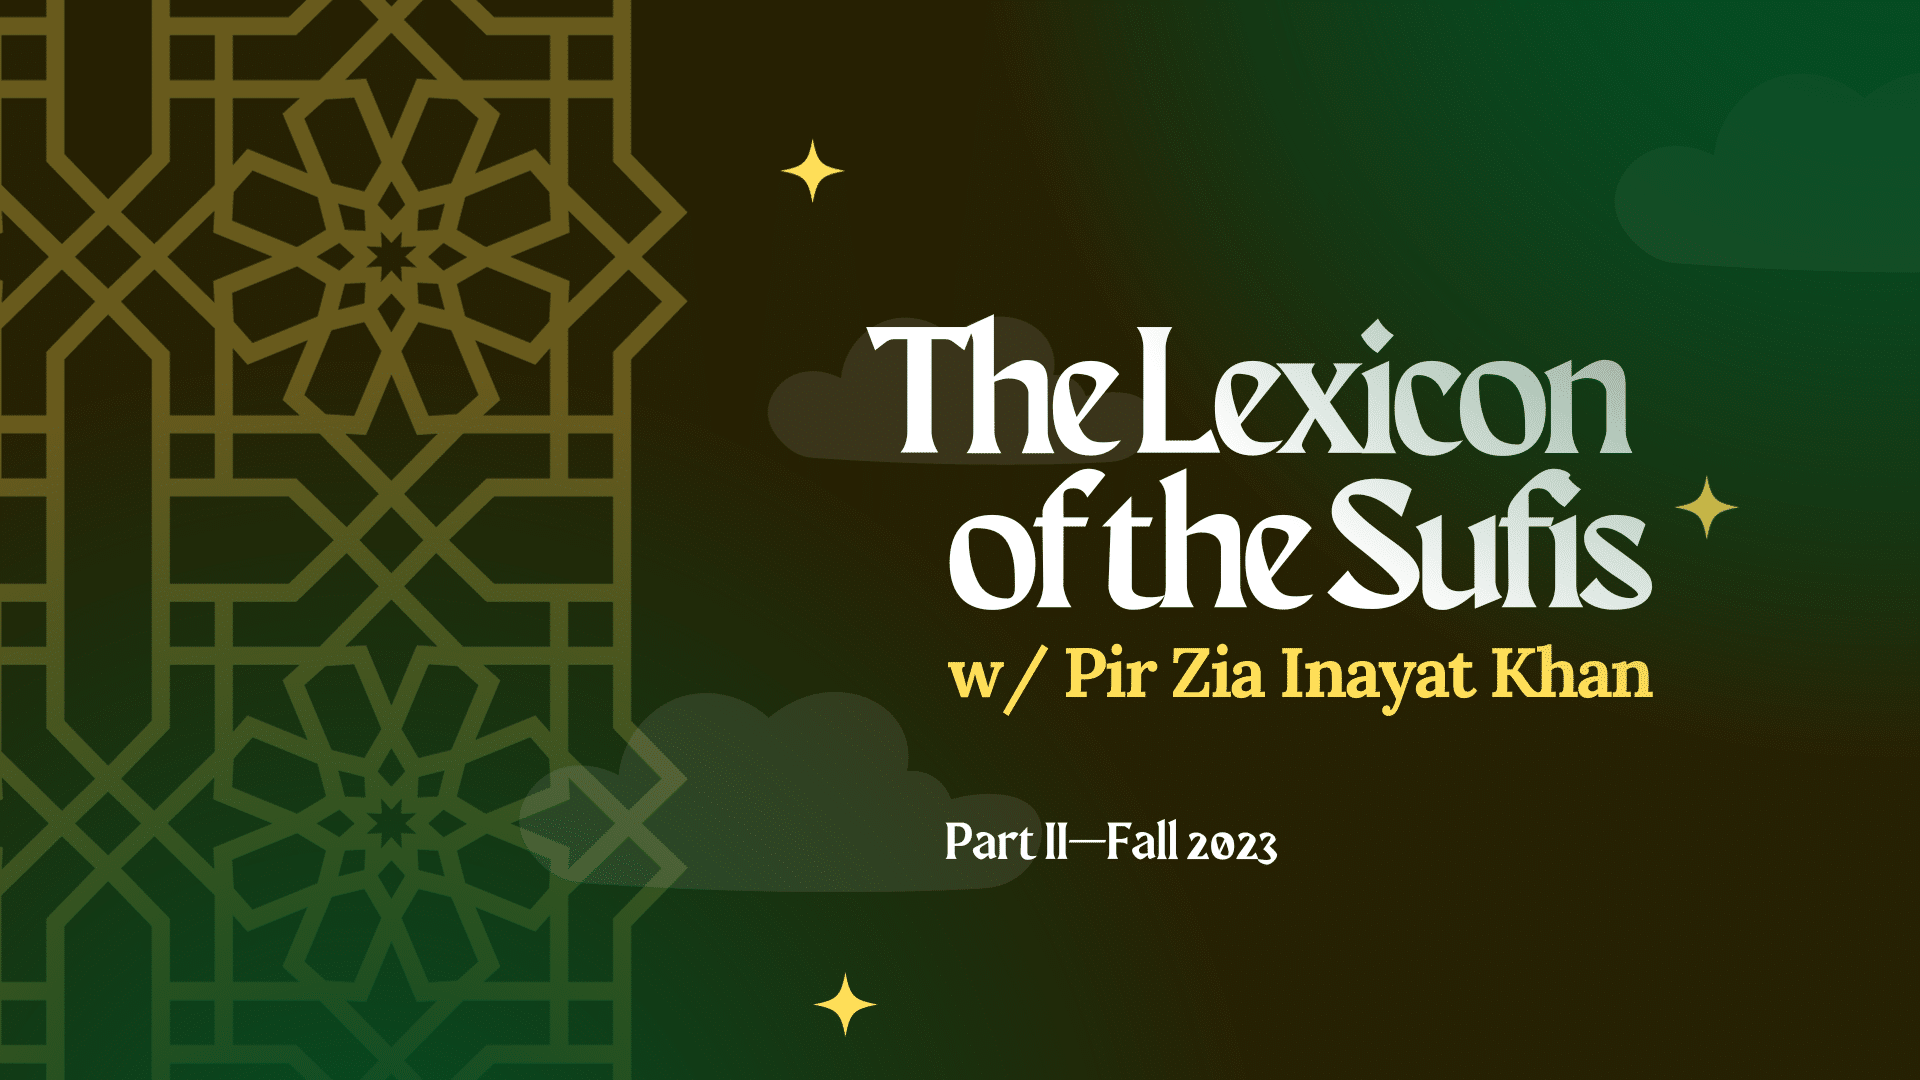 The Lexicon of the Sufis w/ Pir Zia Inayat Khan Part II, Fall 2023